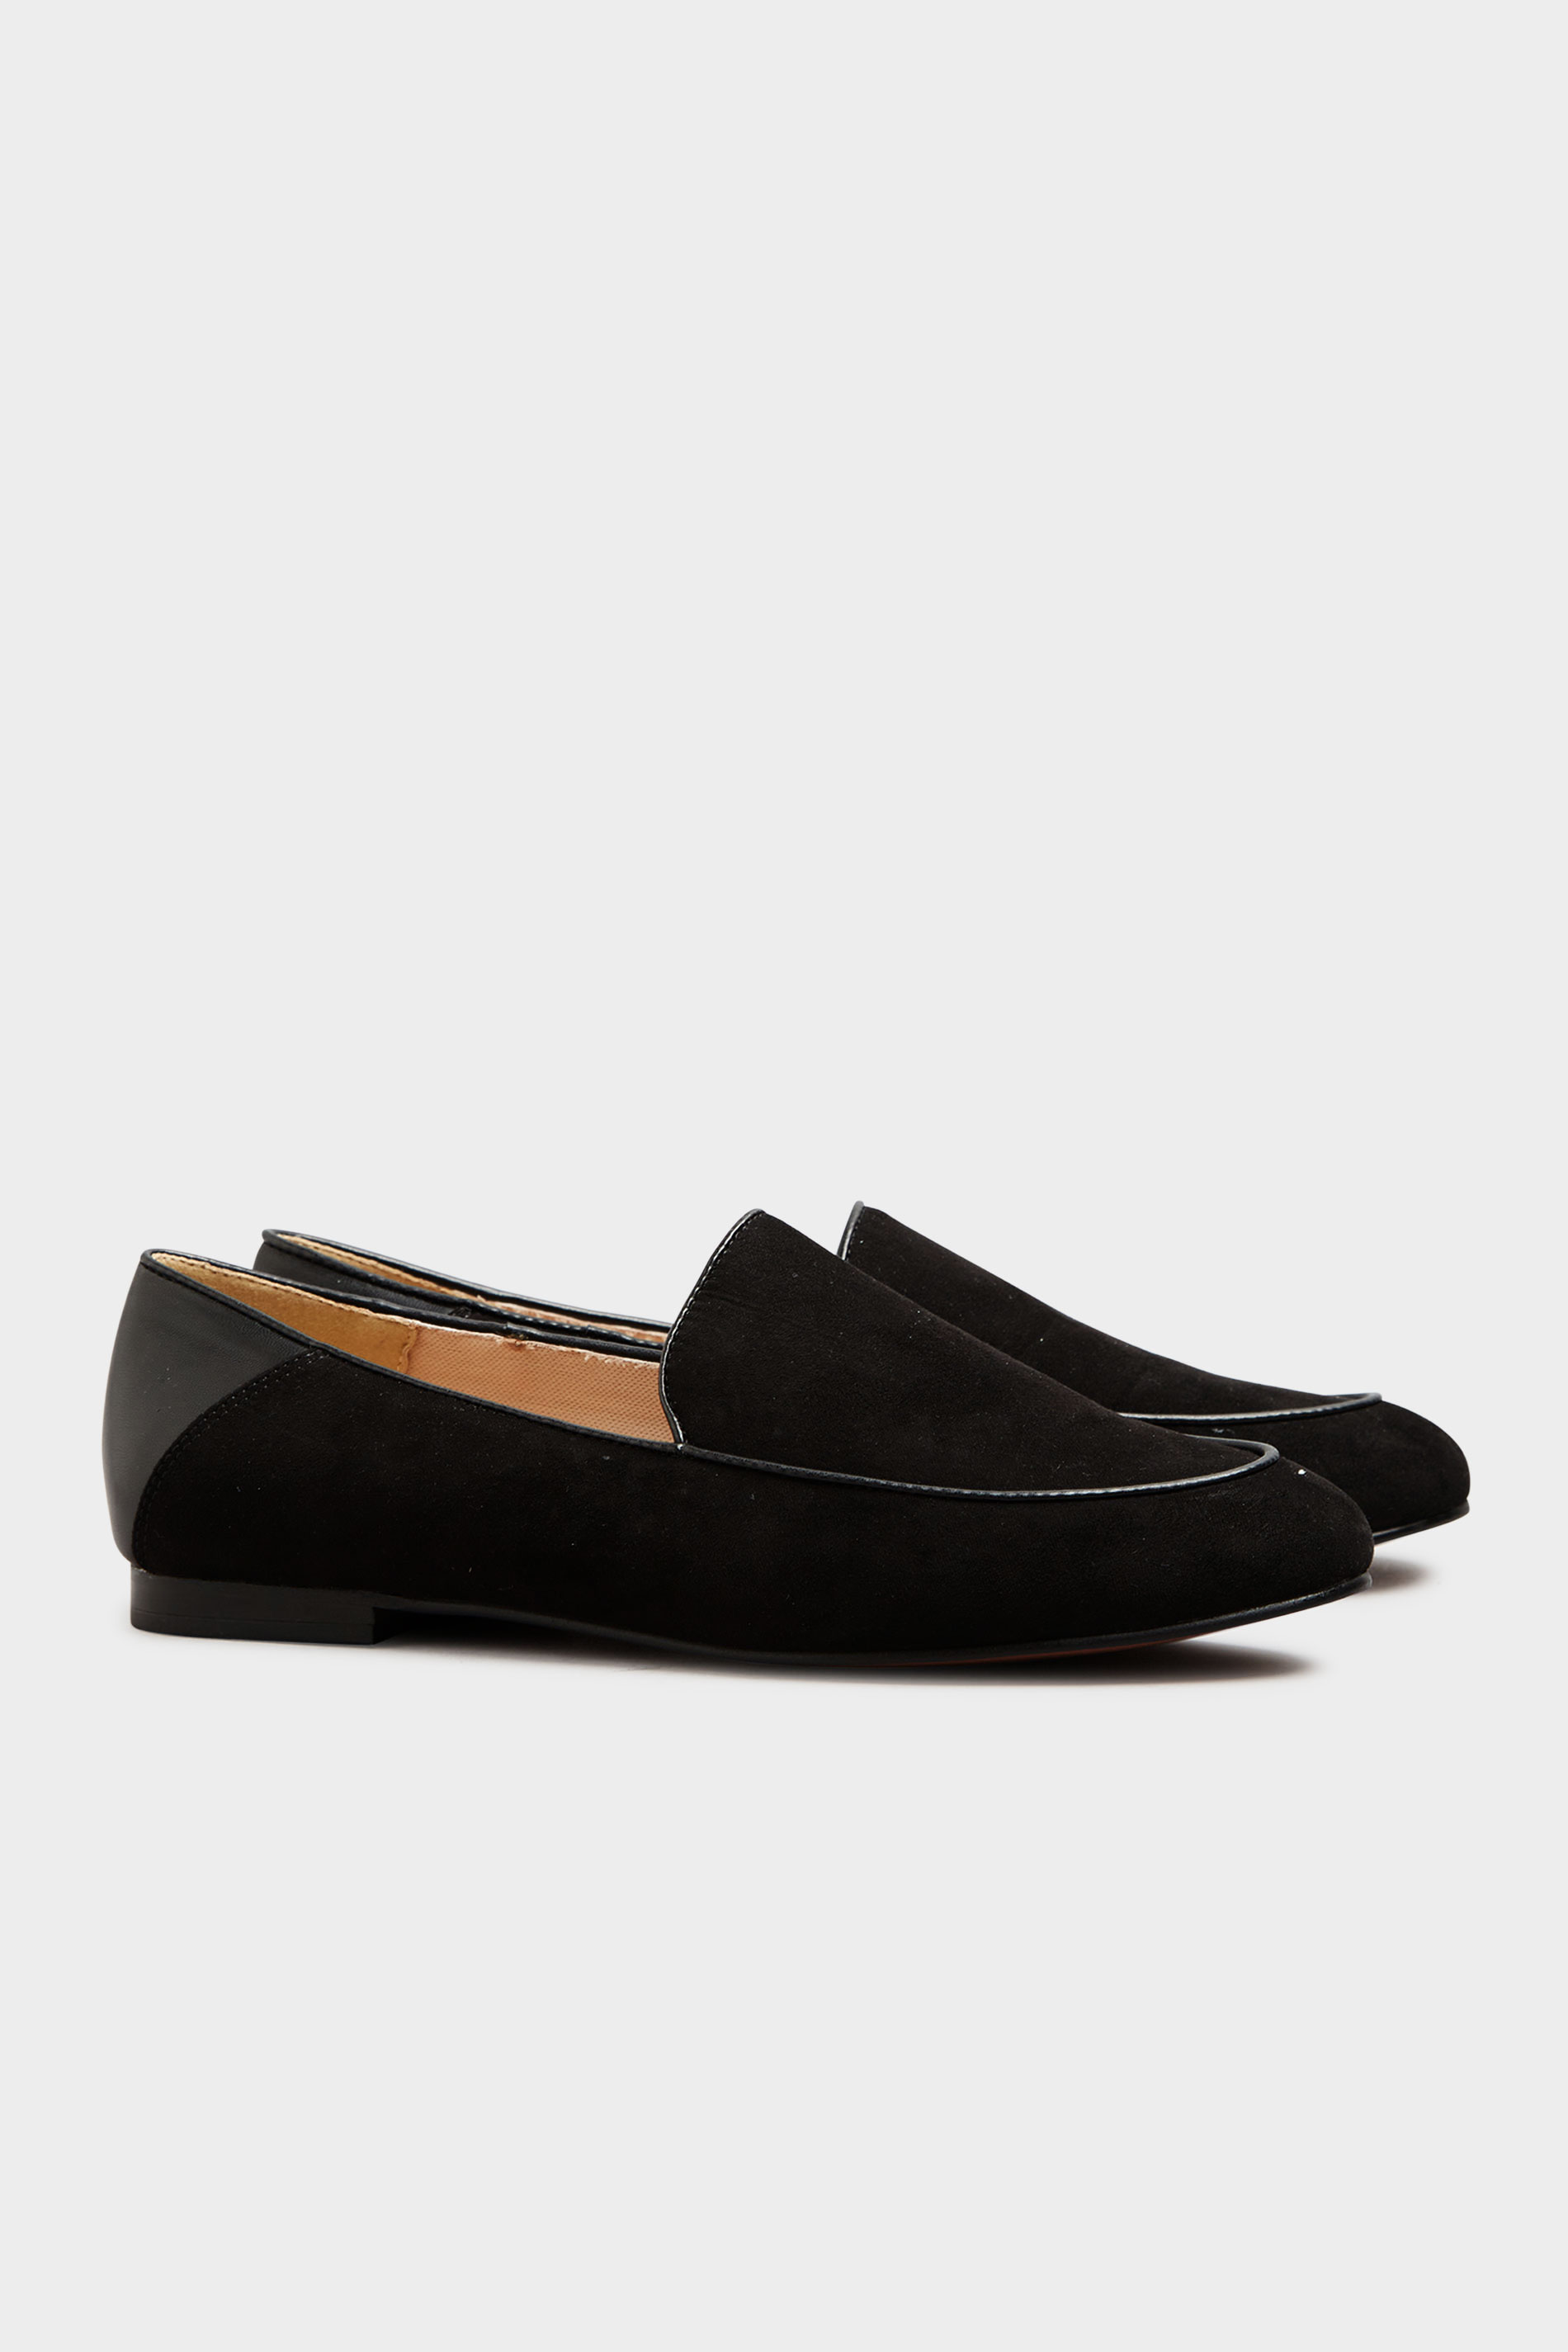 LTS Black Suede Loafers In Standard D Fit 1